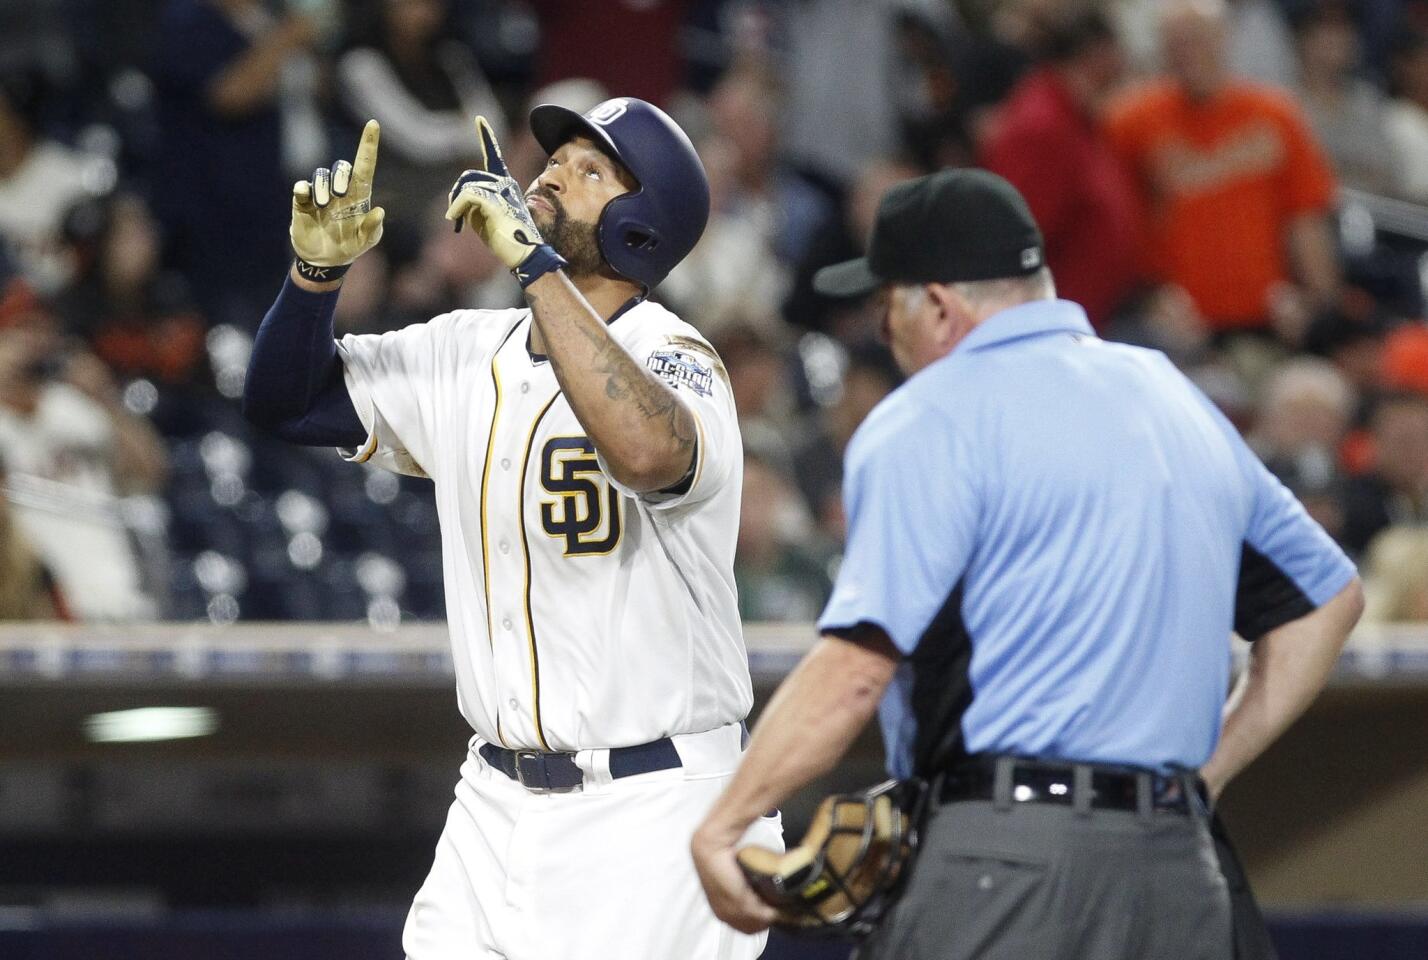 The Padres' Matt Kemp points up after hitting a home run in the ninth inning.